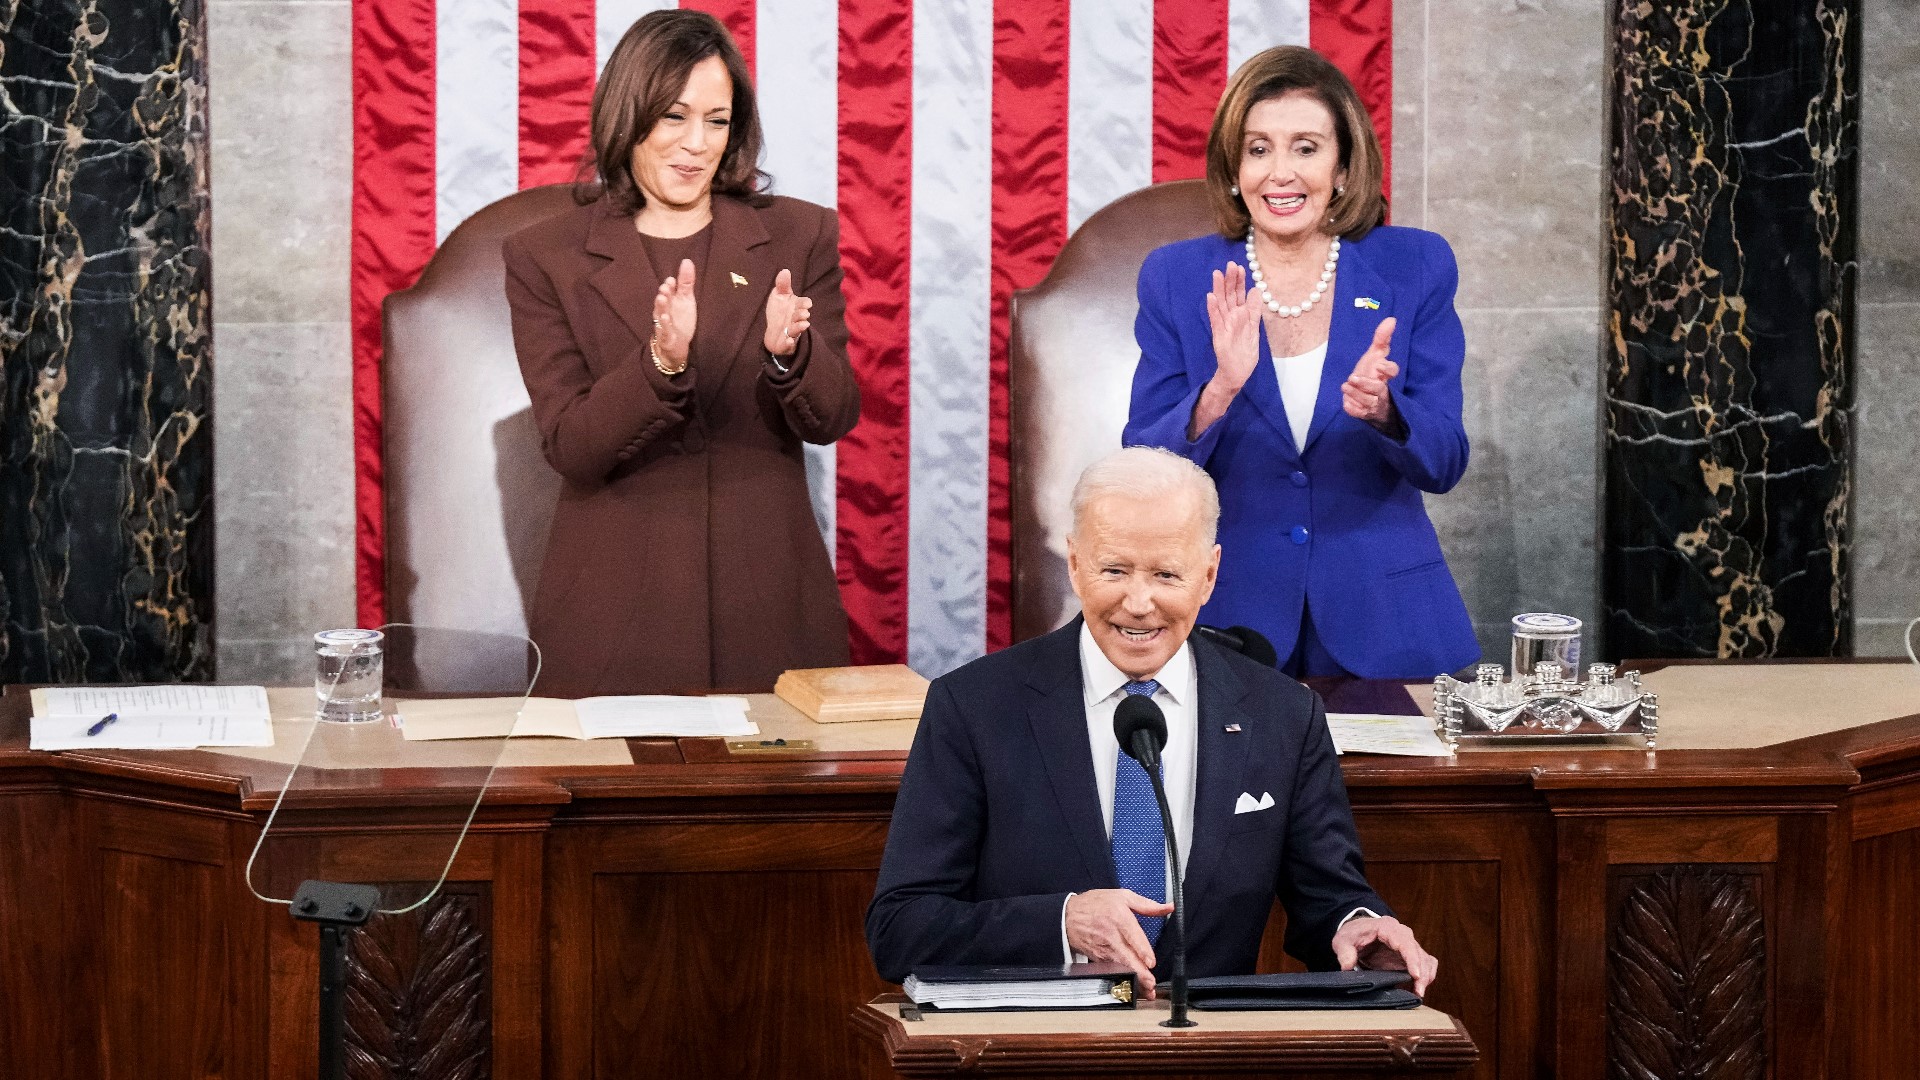 The VERIFY team is fact-checking claims from Biden’s first State of the Union address as president.